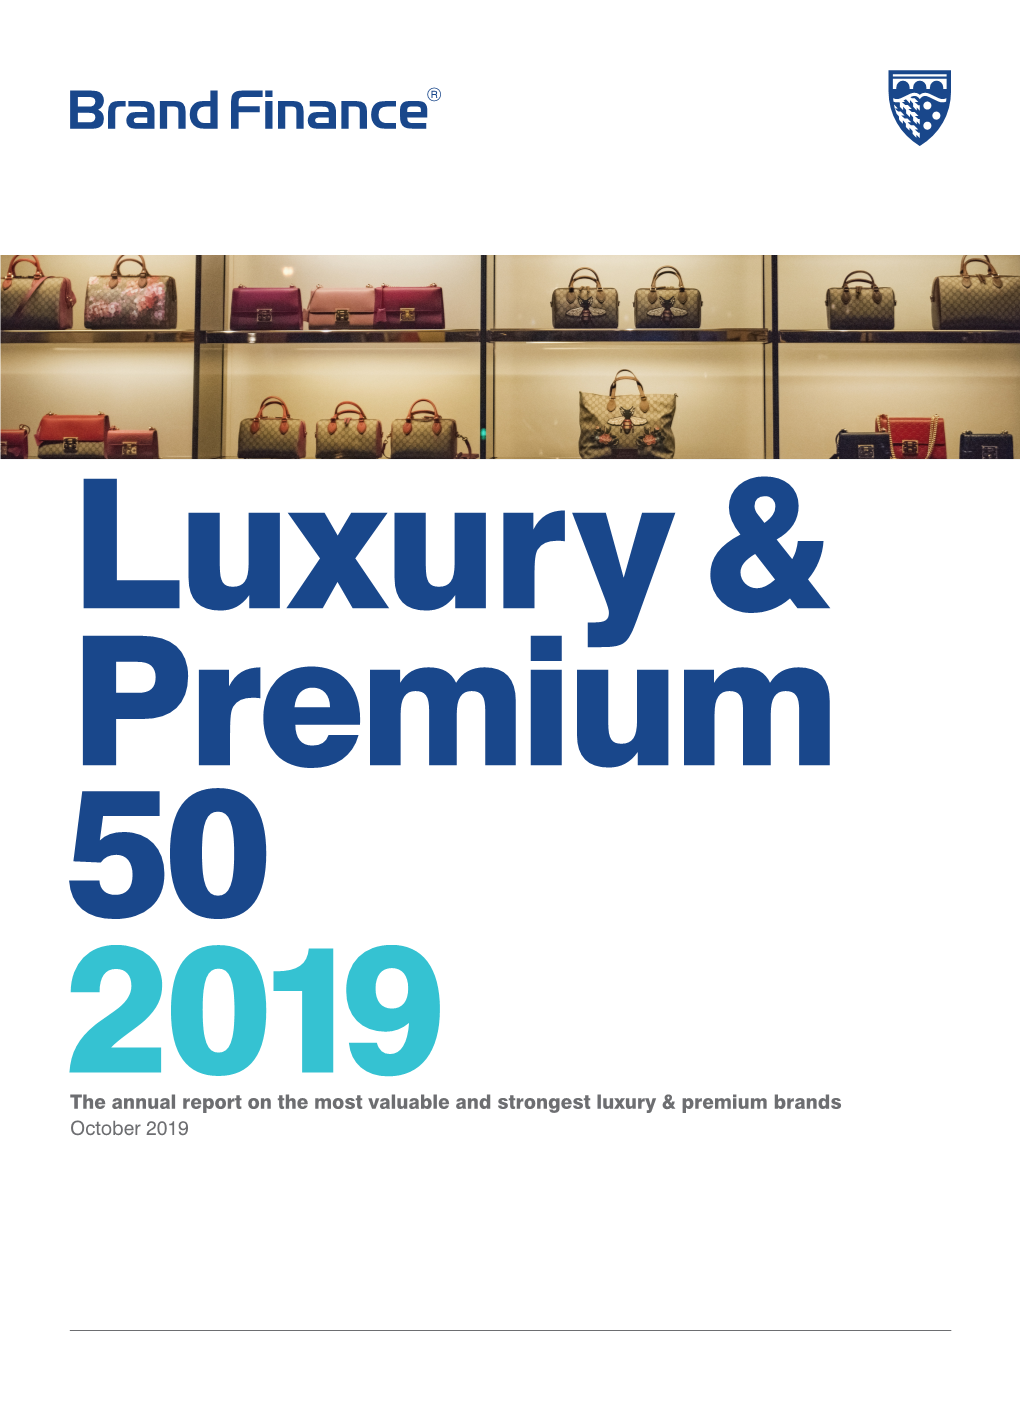 The Annual Report on the Most Valuable and Strongest Luxury & Premium Brands October 2019 About Brand Finance